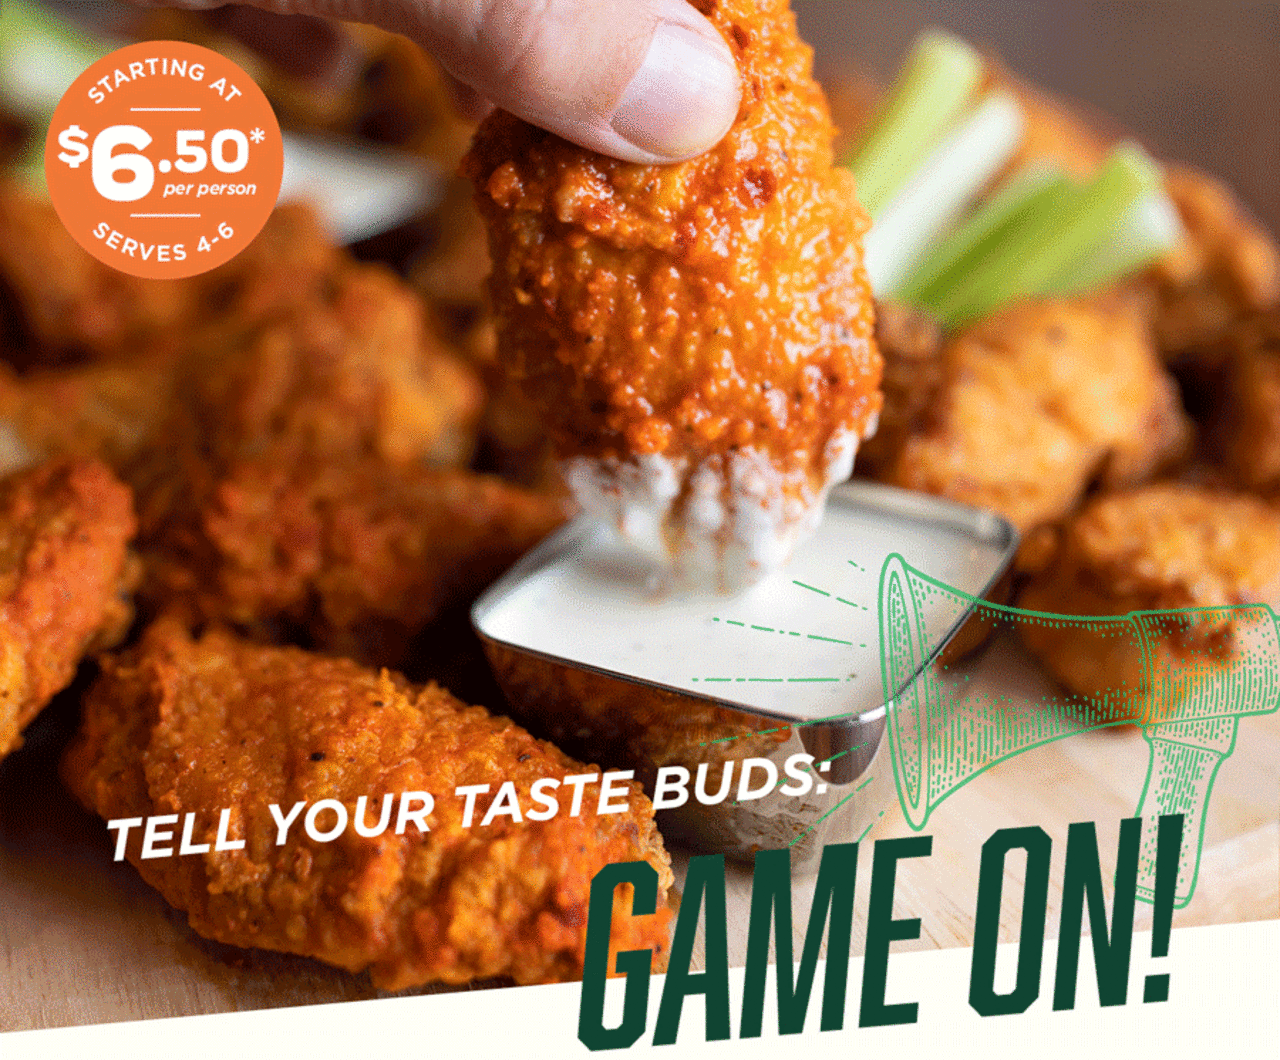 Tell your taste buds... Game On!